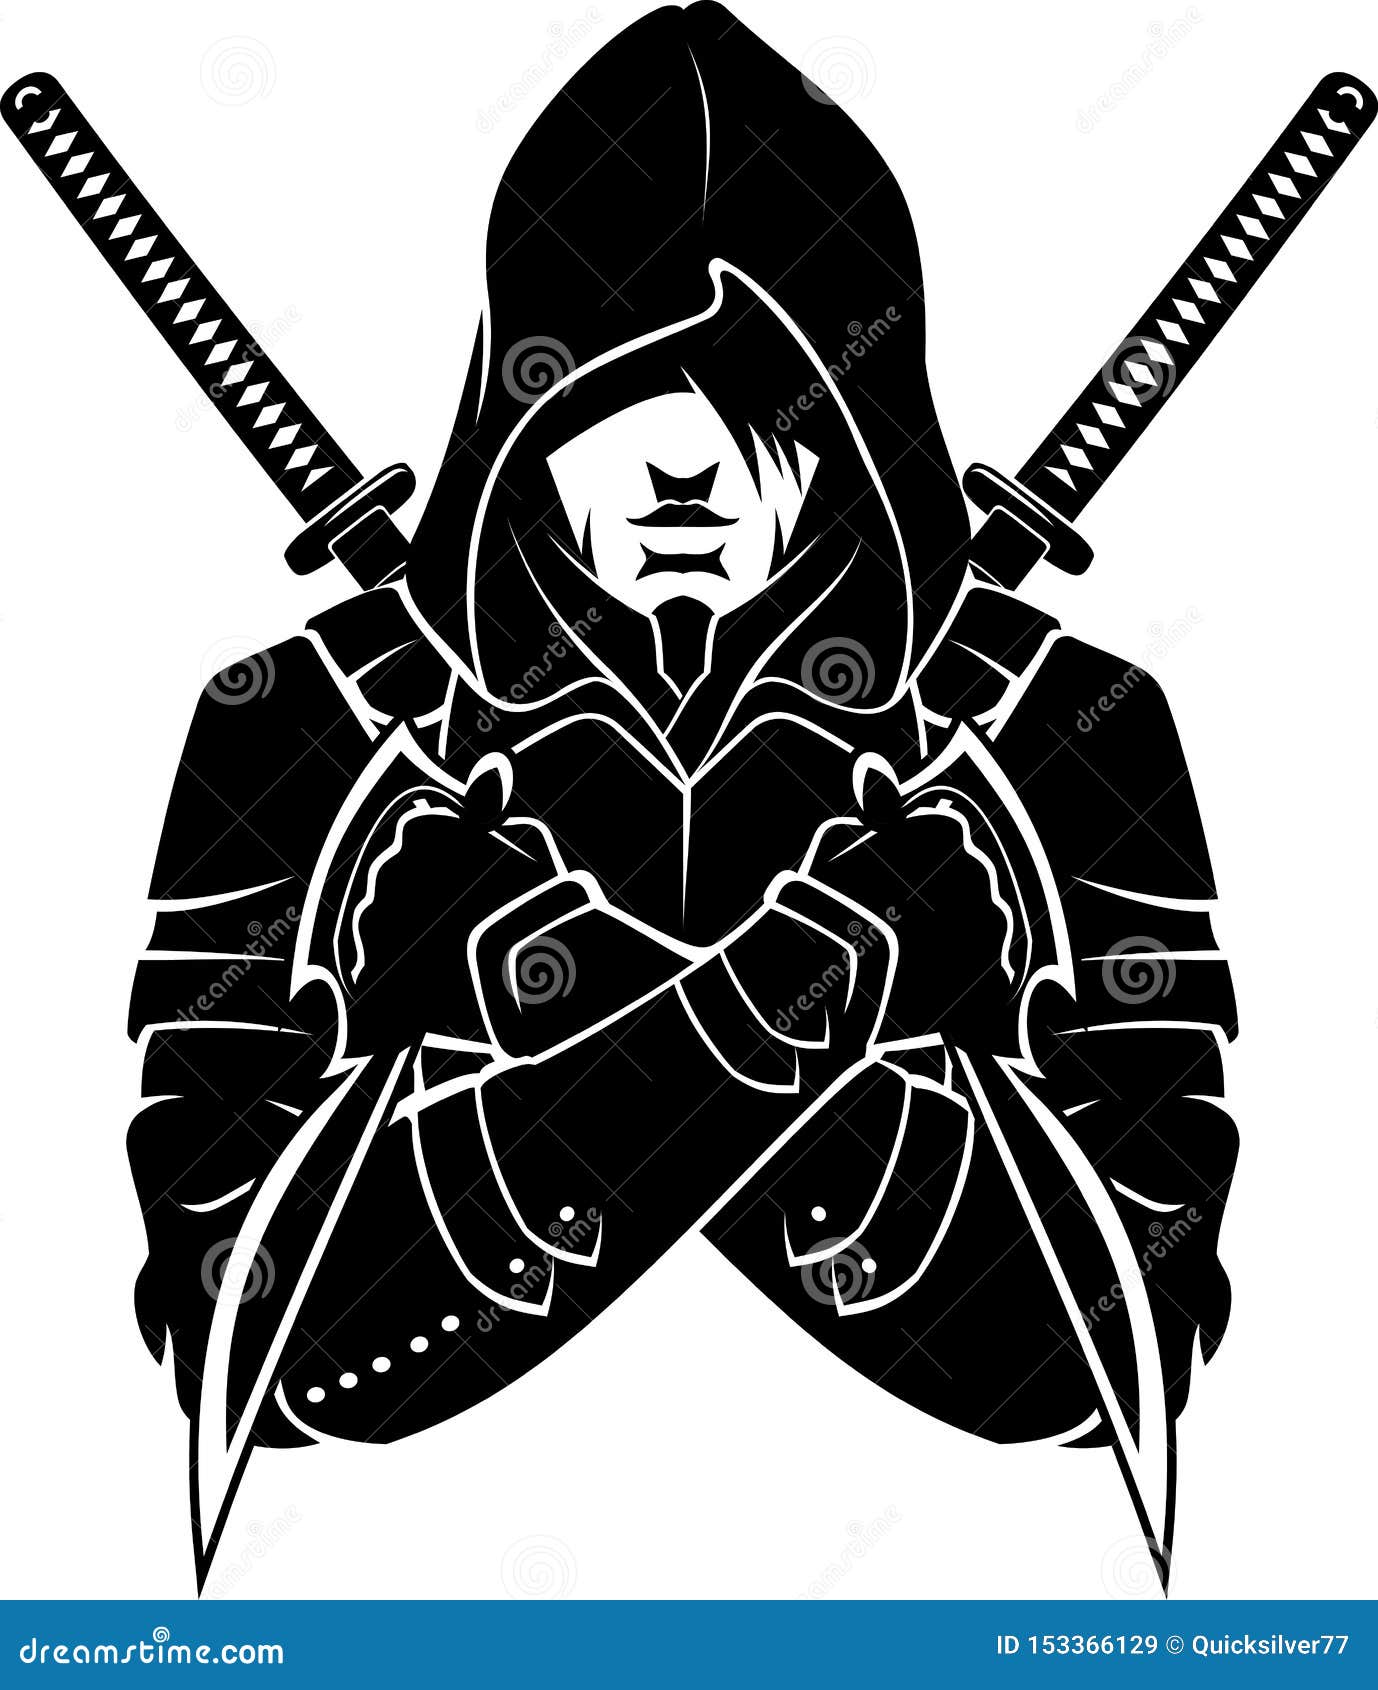 hooded man, armed and dangerous